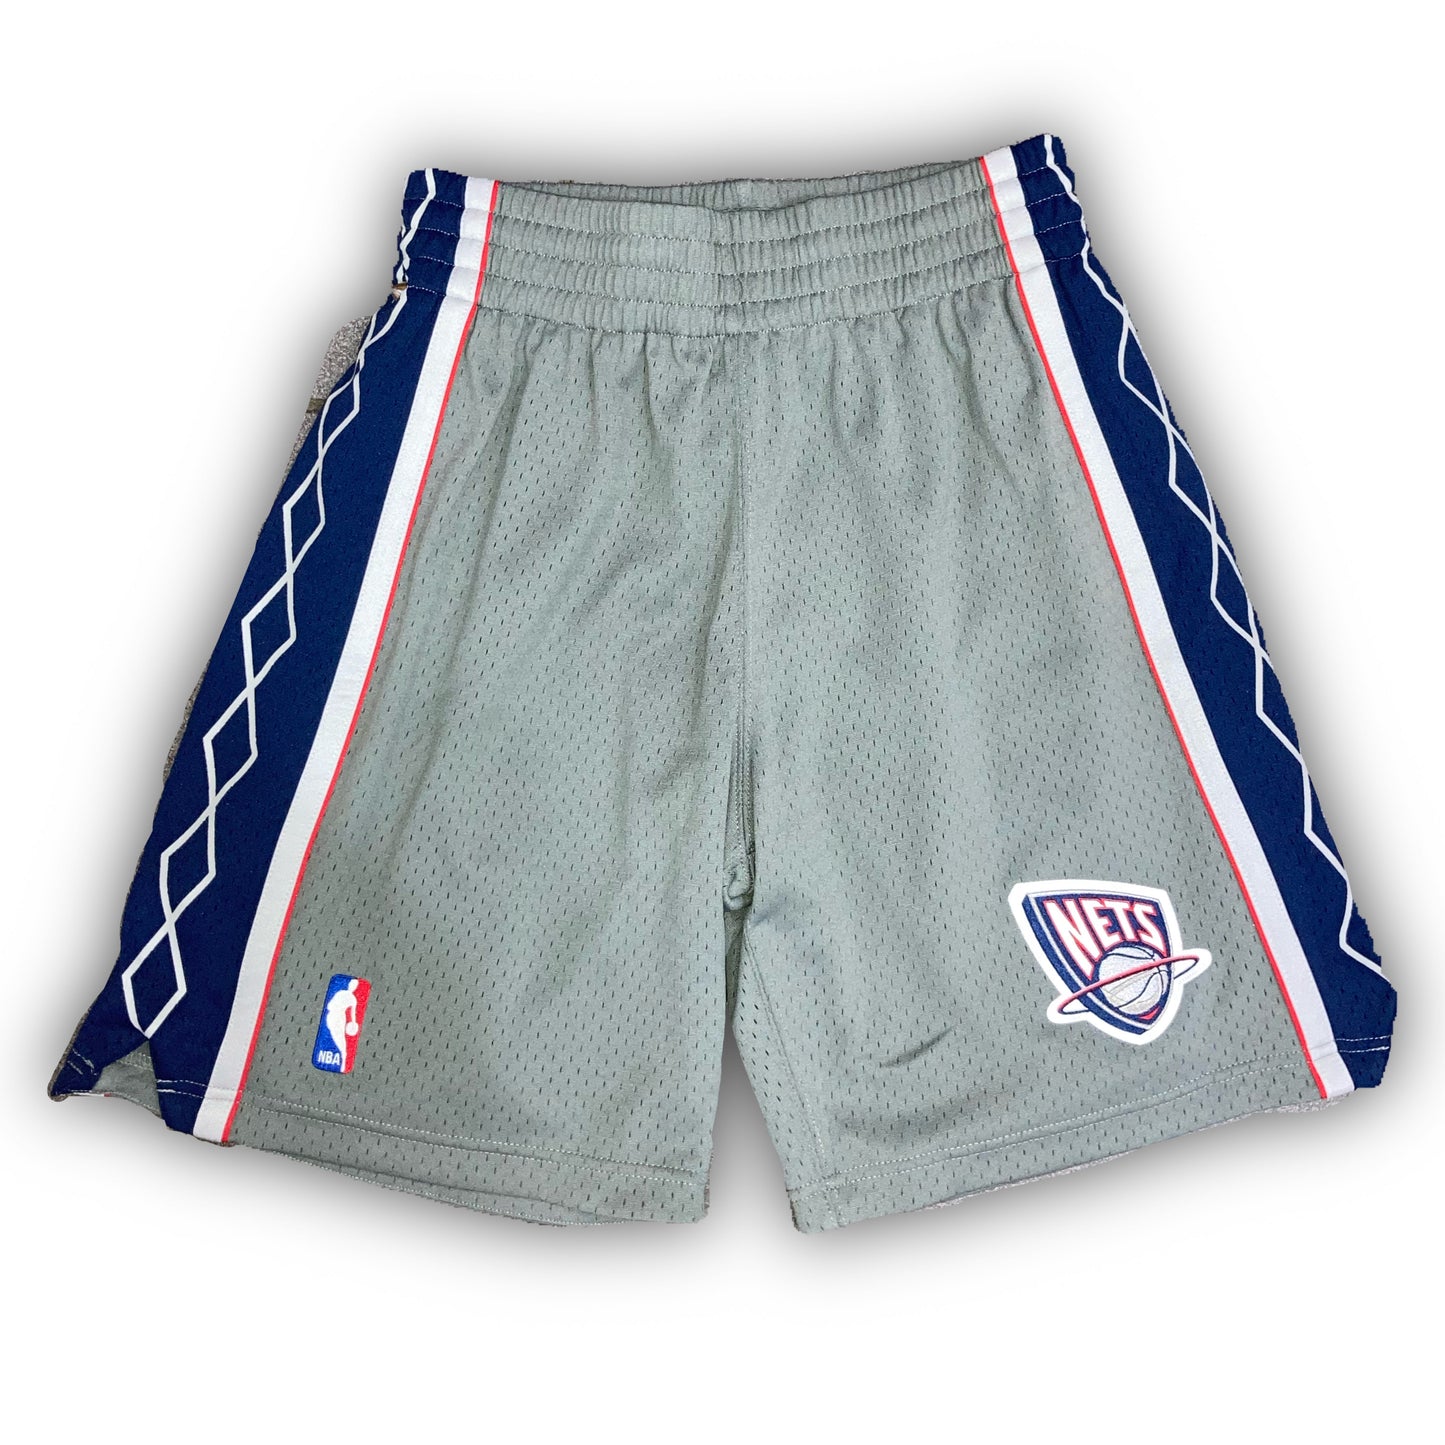 M&N NBA Authentic Shorts New Jersey Nets Alternate 2004-05